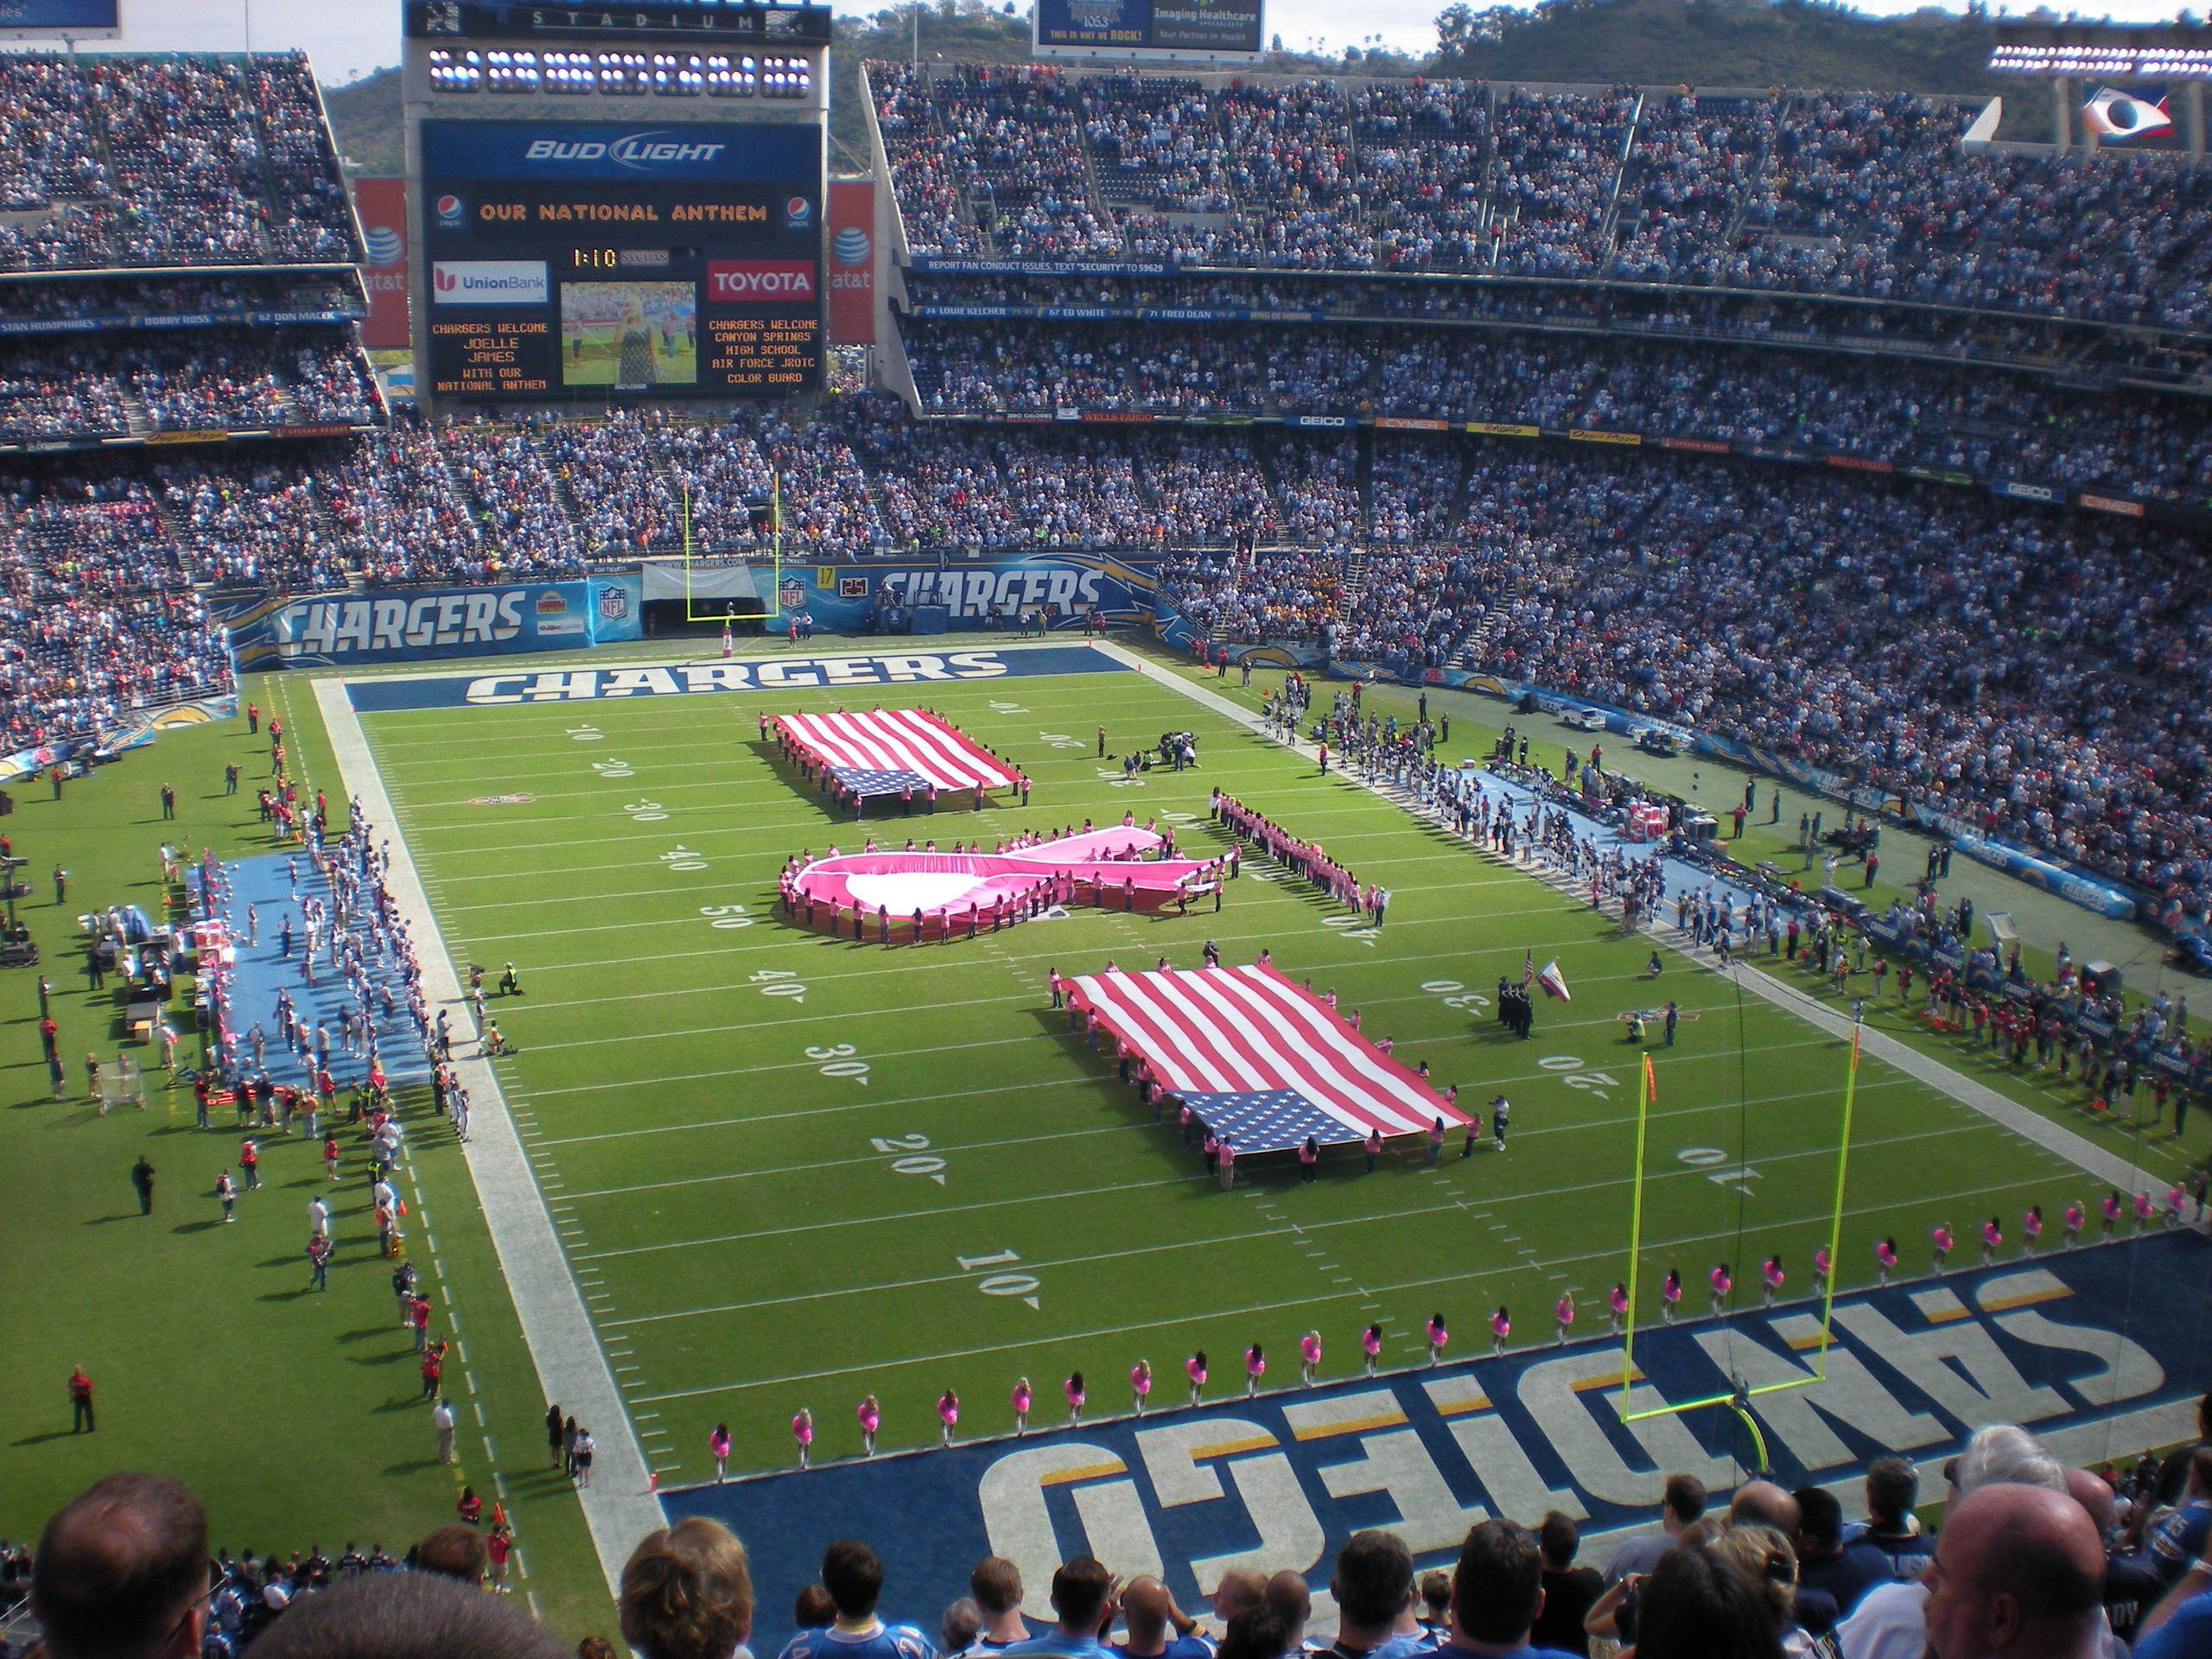 chargers - San Diego Chargers Photo (18164223) - Fanpop